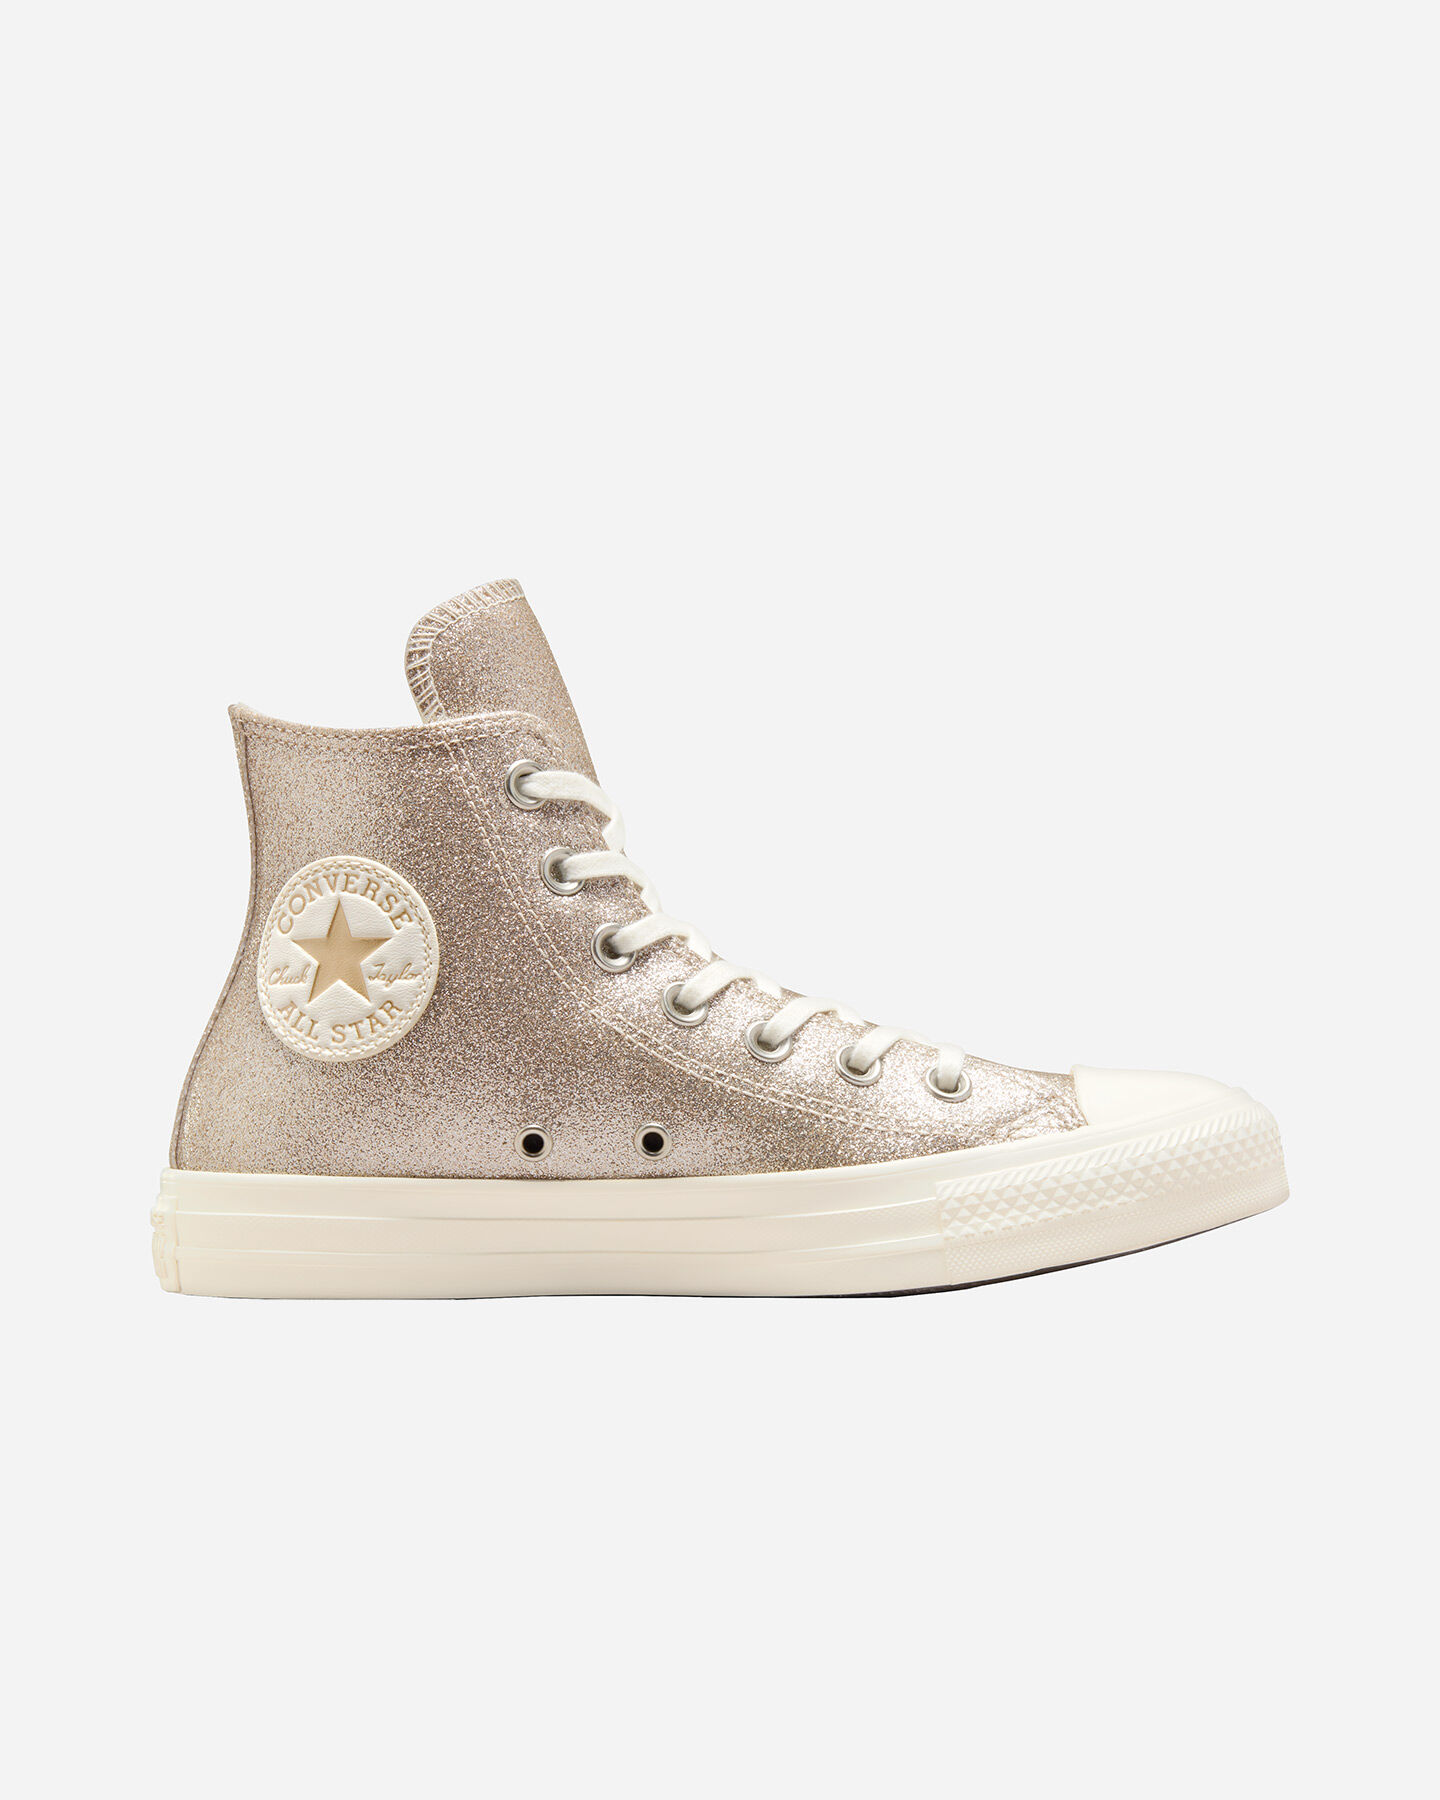  Scarpe sneakers CONVERSE CHUCK TAYLOR AS HIGH CANVAS W S5630027|718|6.5 scatto 0